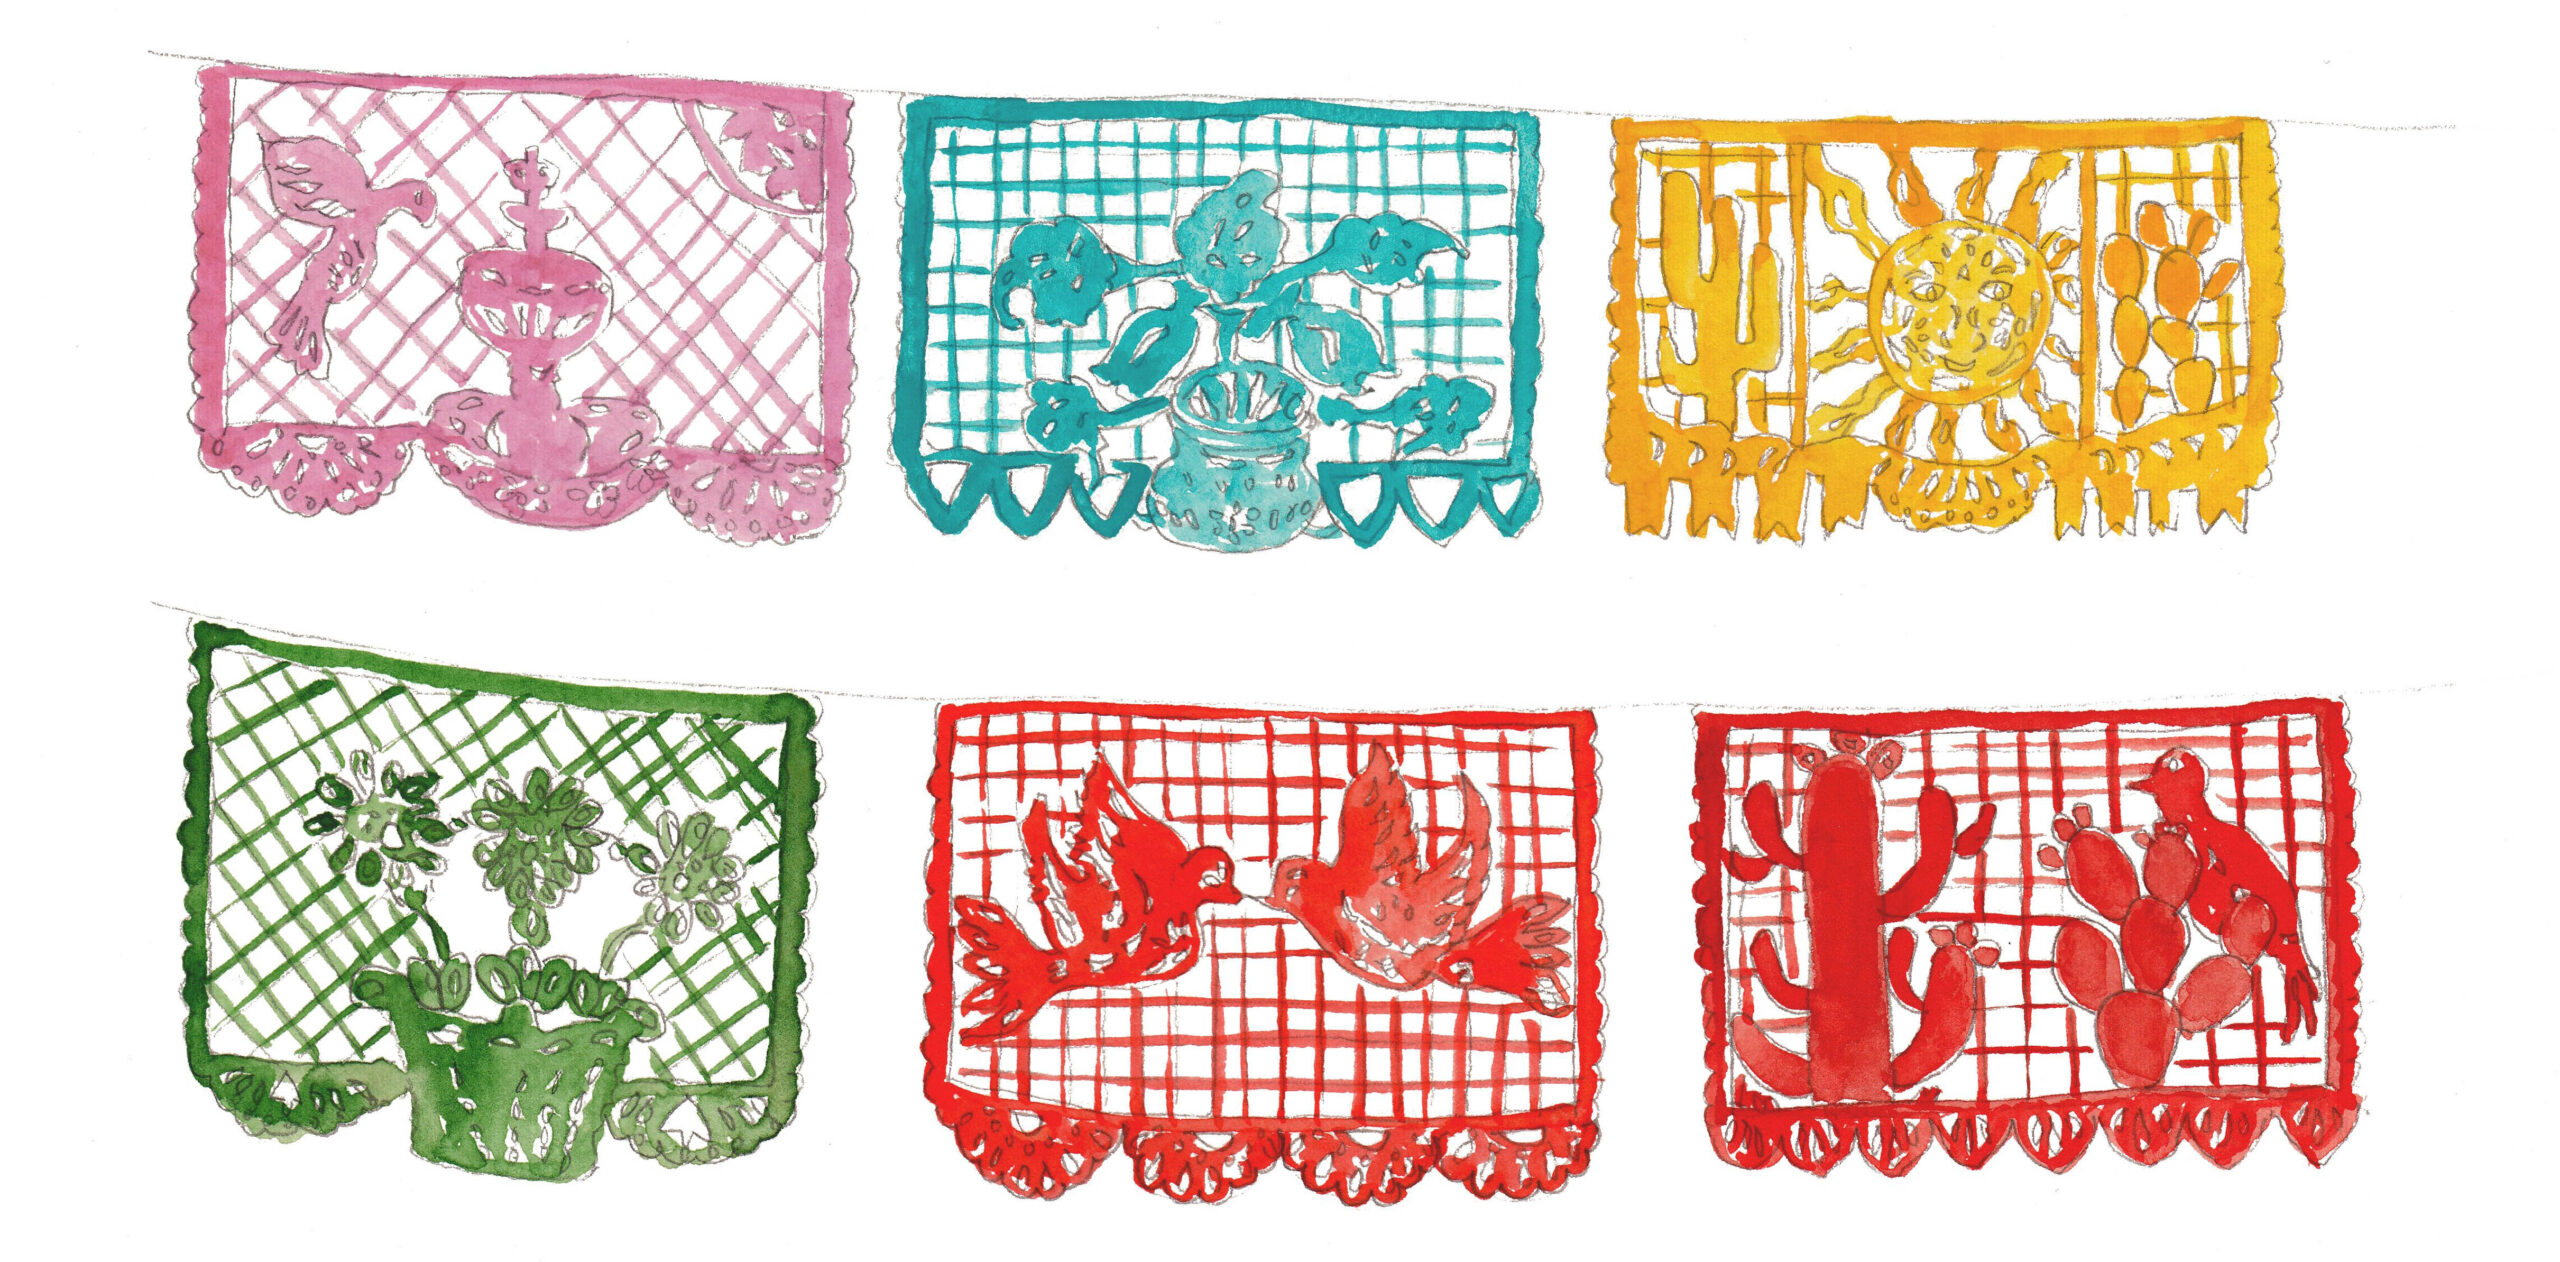 Papel Picado by Basak Notz, artwork featured at the National Museum of Mexican Art. There are six different vibrantly colored patch squares featuring different scenes, including a bird drinking out of a bath, a plant, a sun in the dessert, a pot of flowers, birds facing each other, and a bird posed on a cactus.